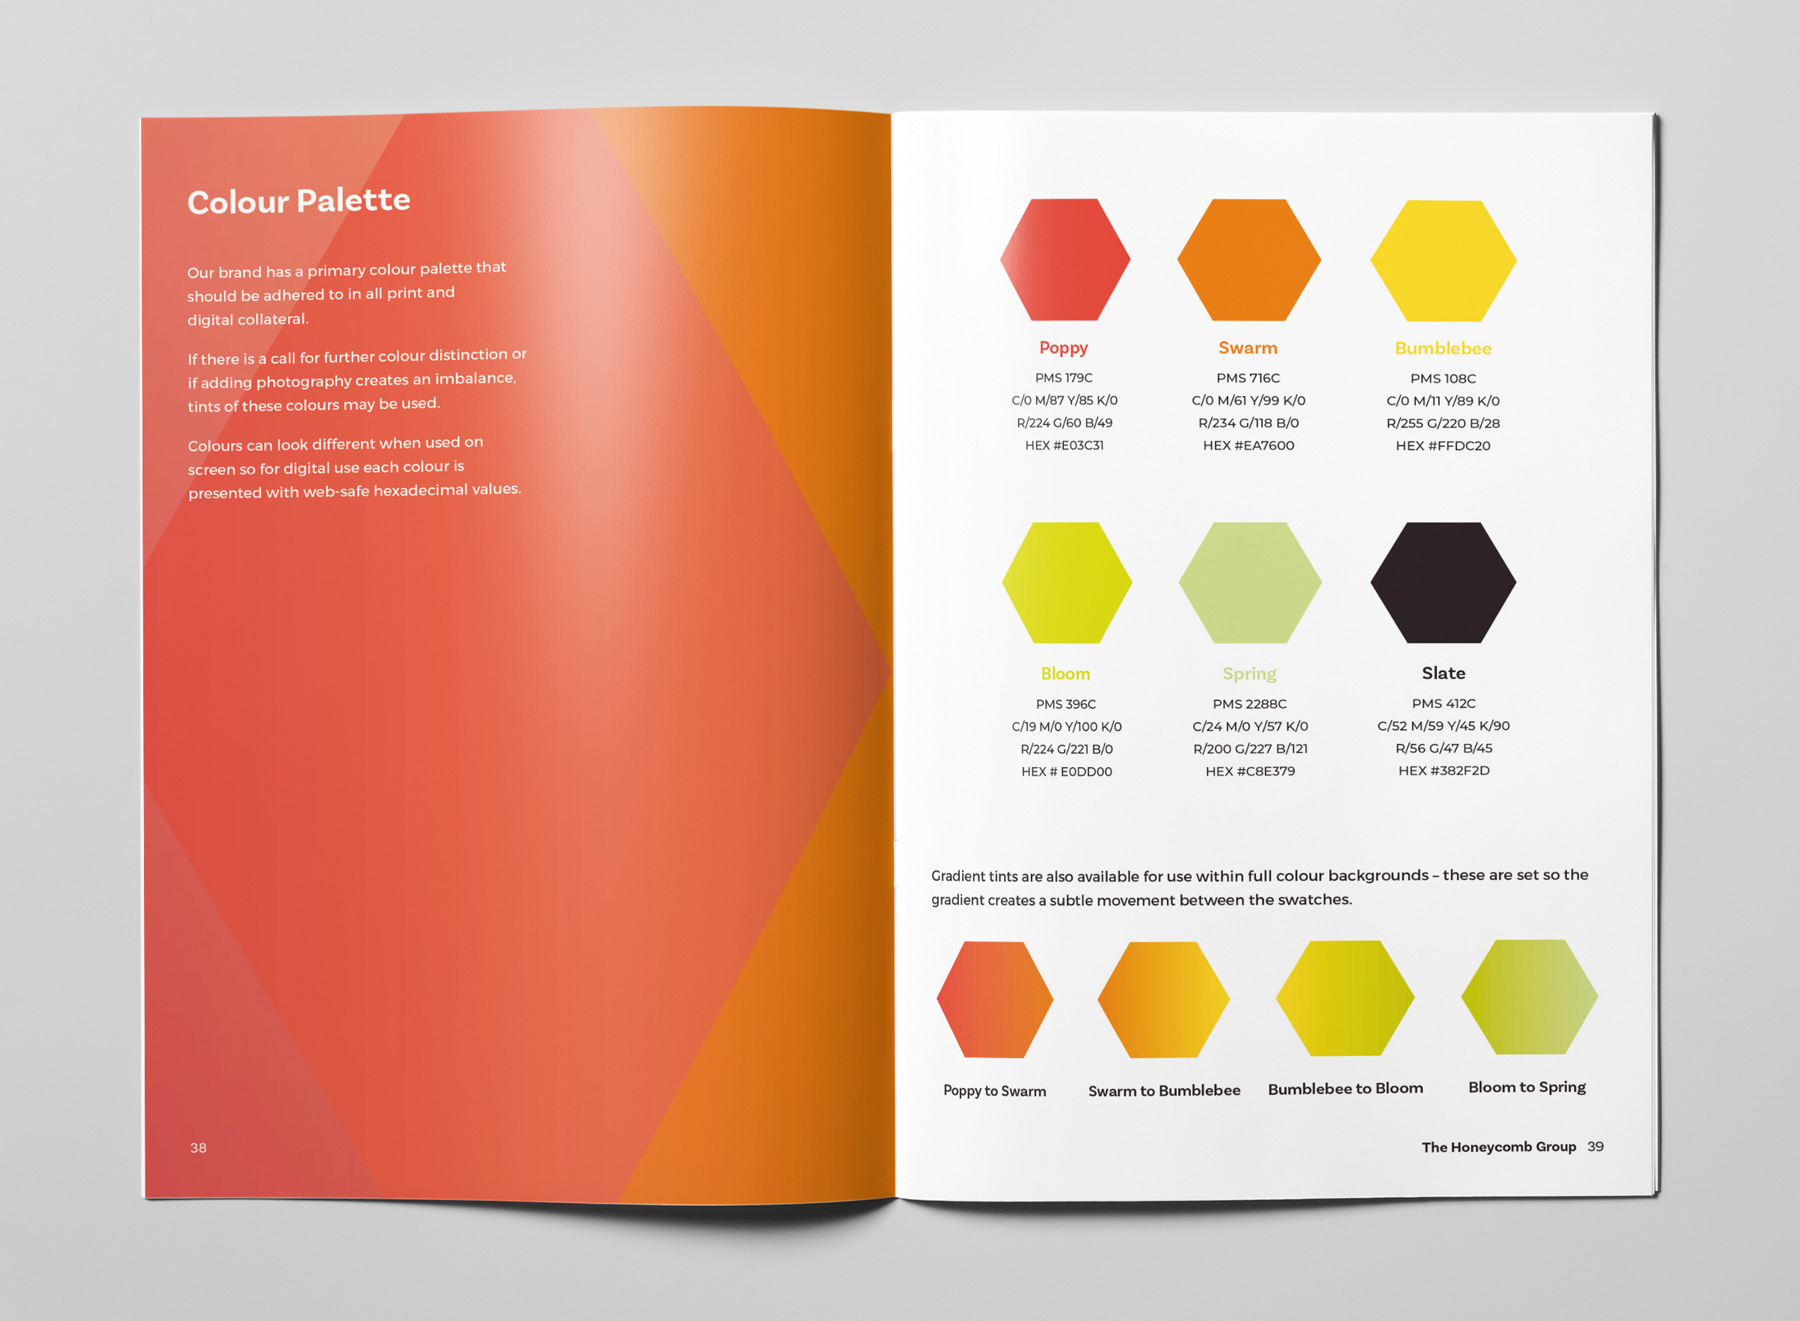 The Honeycomb Group brand colour palette